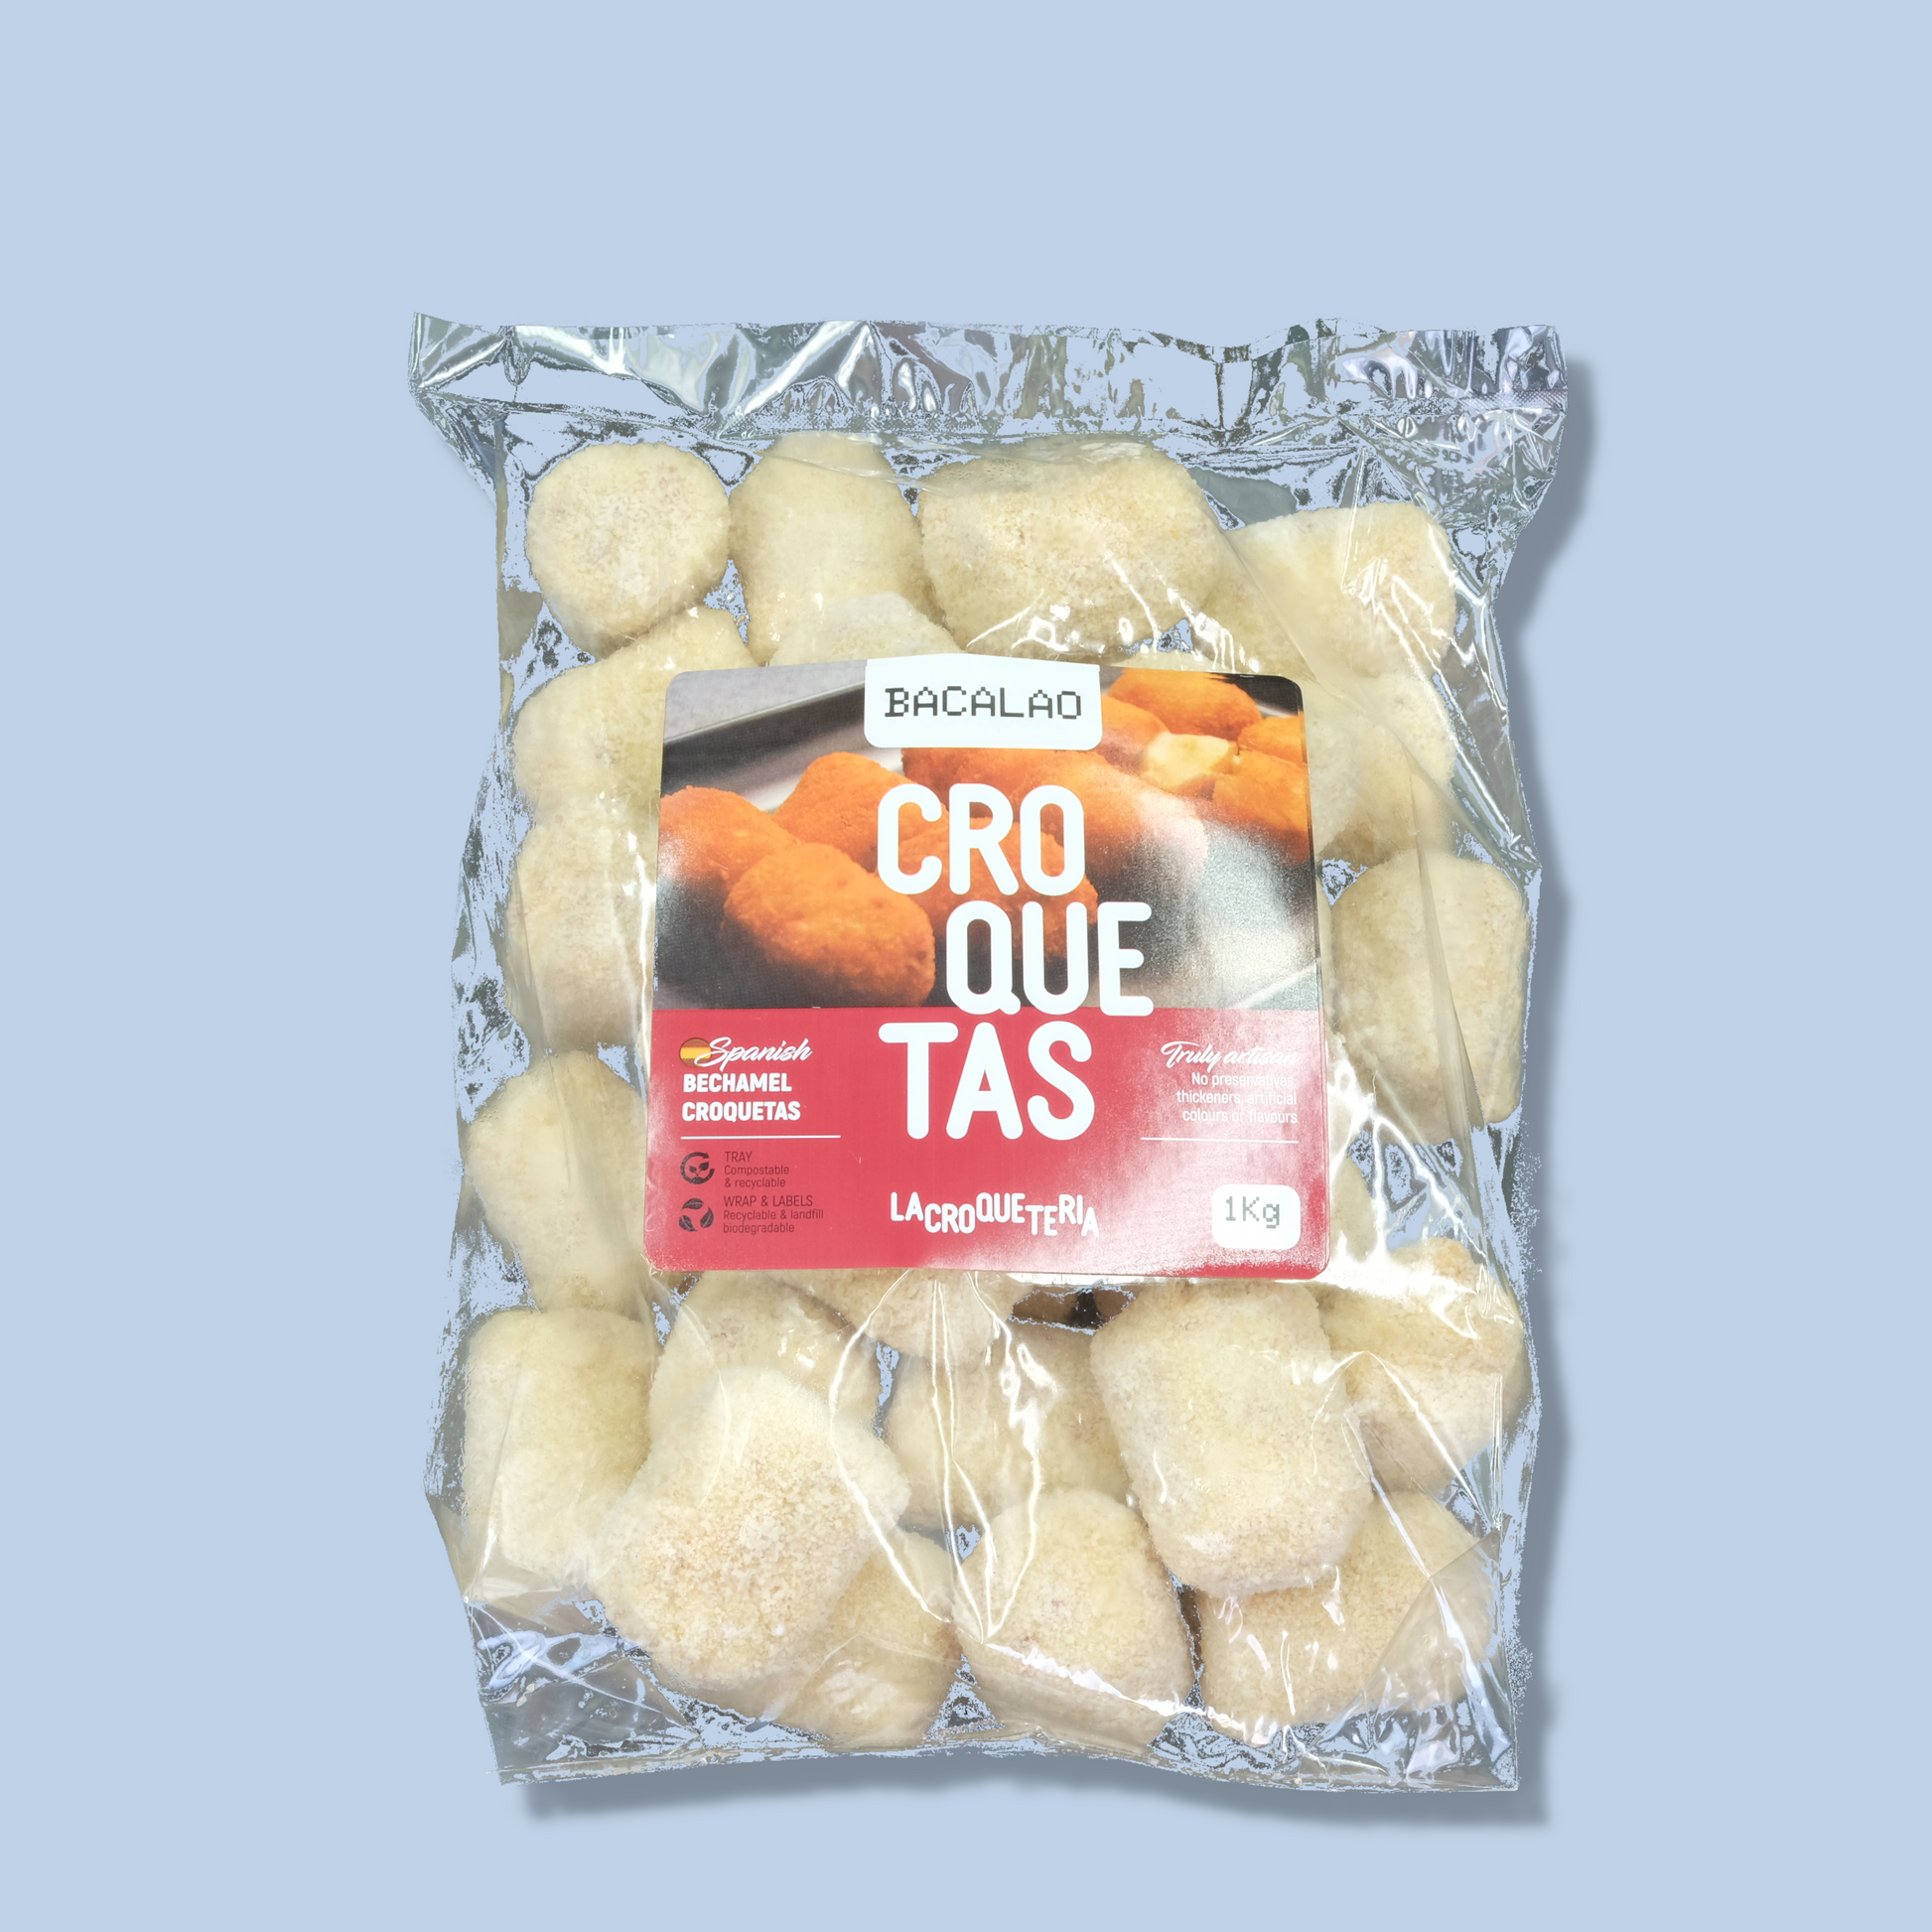 Bacalao croquetas. Artisan Spanish bacalao croquettes by La Croqueteria. Melbourne (Australia). Retail format 1Kg (approx. 30pcs). Also available in wholesale format..